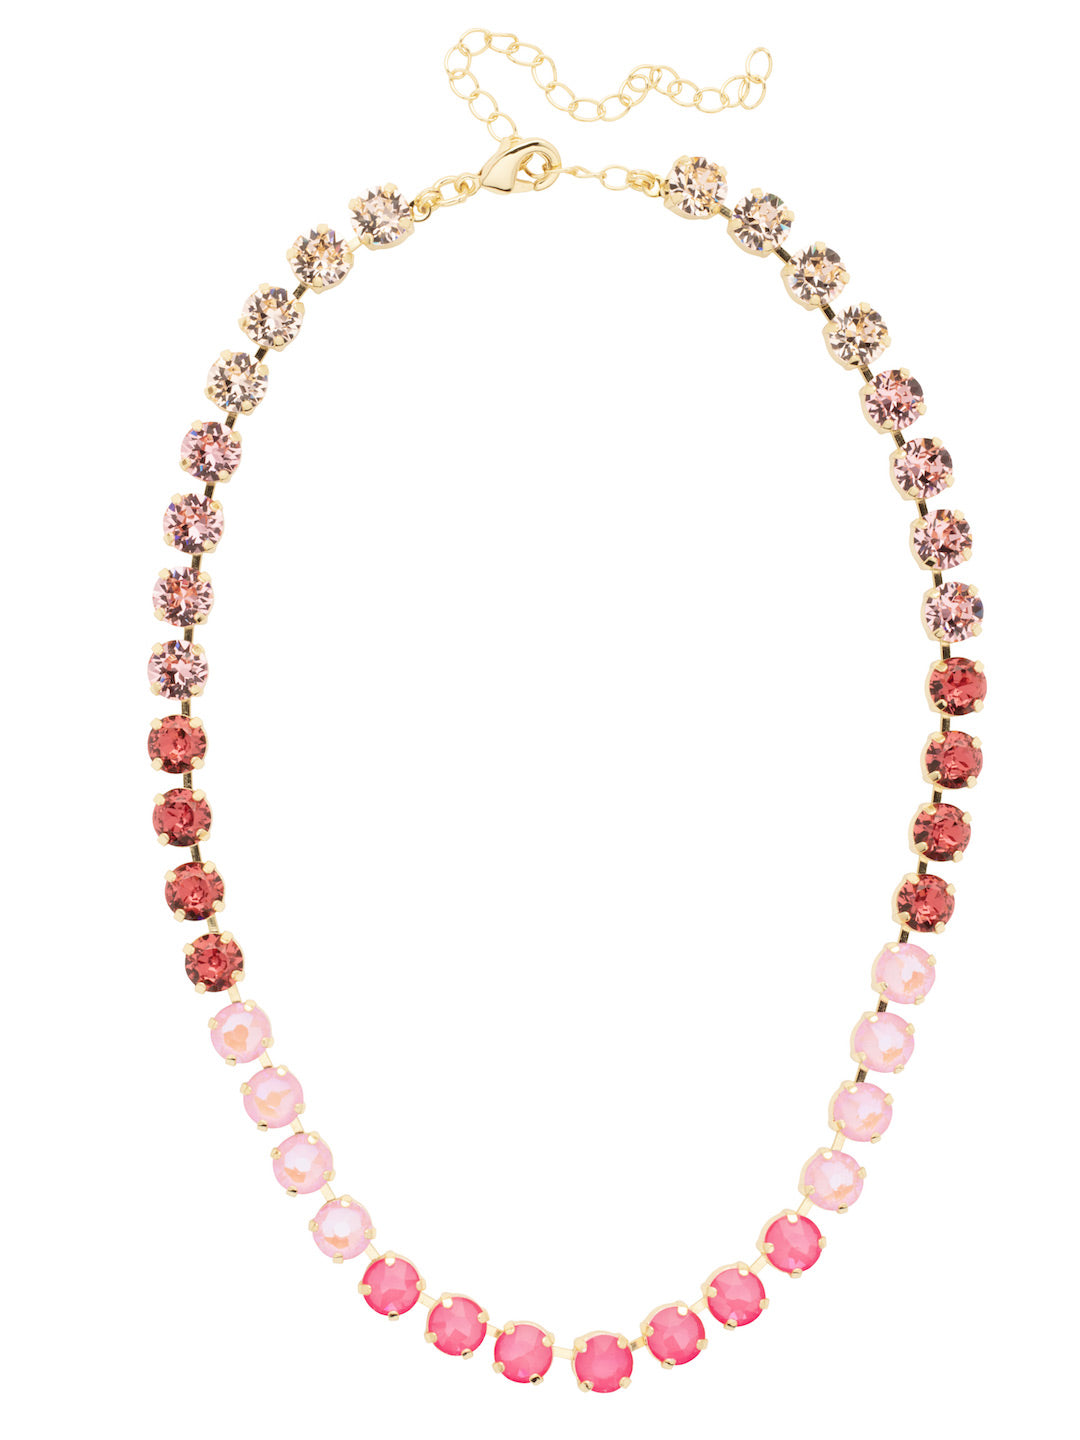 Matilda Tennis Necklace - NFJ4BGBFL - <p>The Matilda Tennis Necklace features a repeating line of round cut crystals on an adjustable chain, secured with a lobster claw clasp. From Sorrelli's Big Flirt collection in our Bright Gold-tone finish.</p>